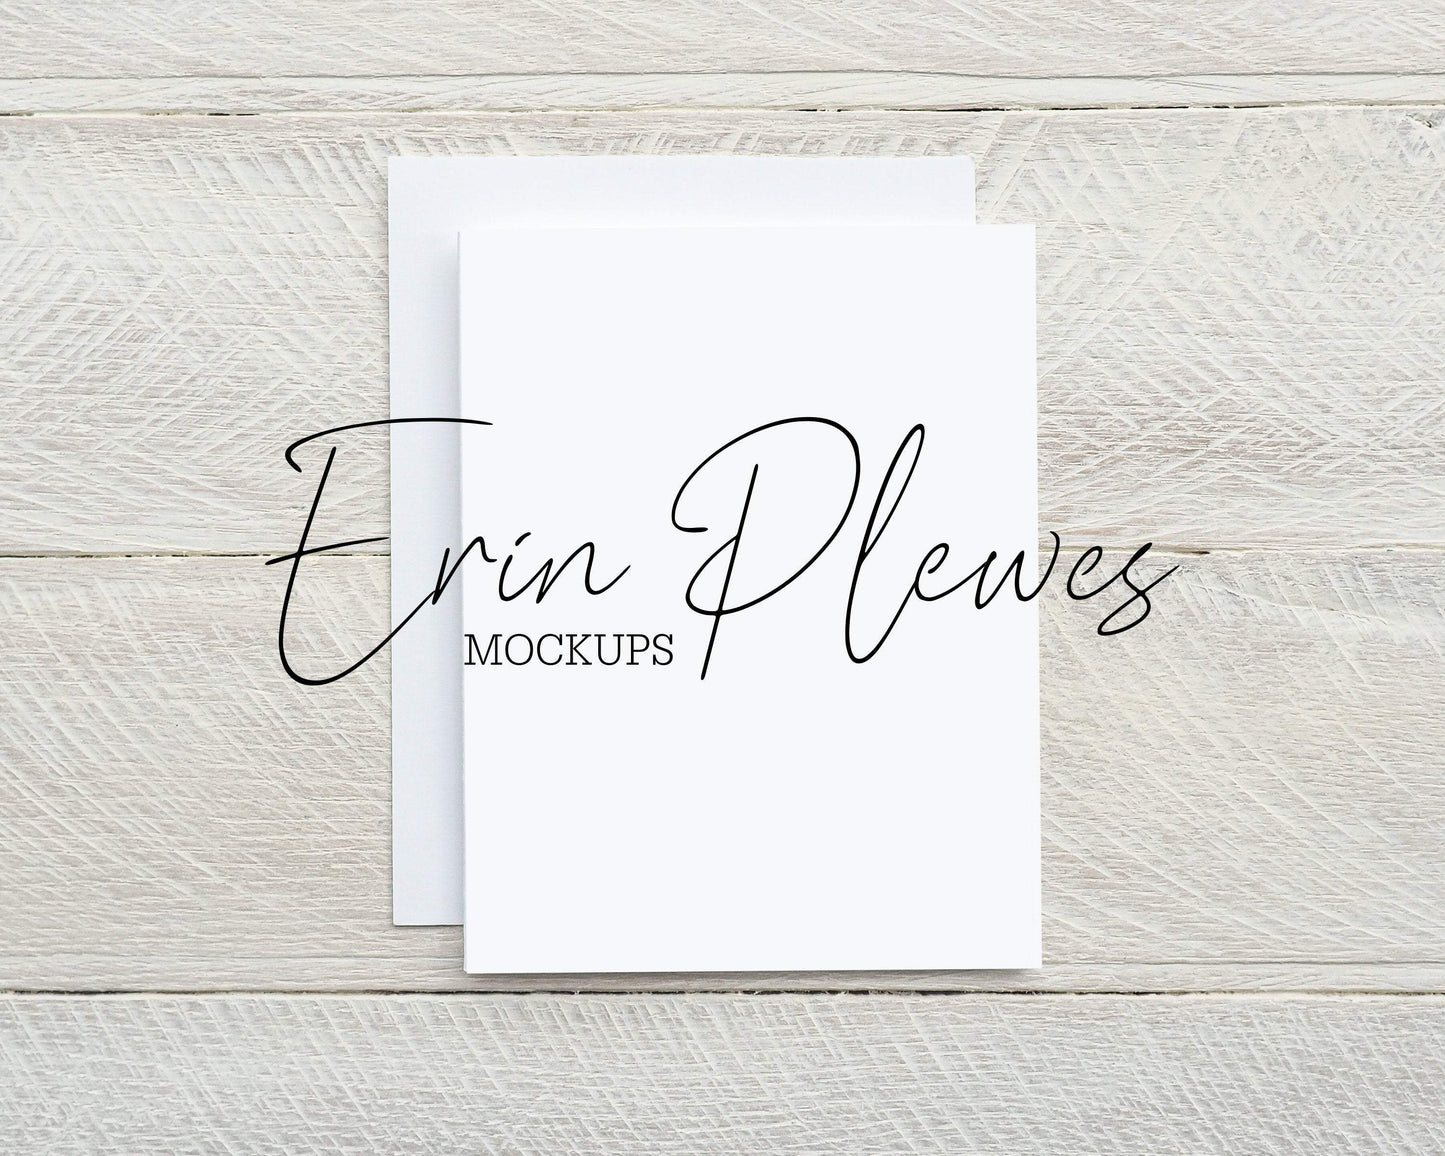 Erin Plewes Mockups A2 Card Mockup White Envelope, Thank You Card Mock Up for Rustic Wedding, Greeting Card Flat Lay, Jpeg Instant Digital Download